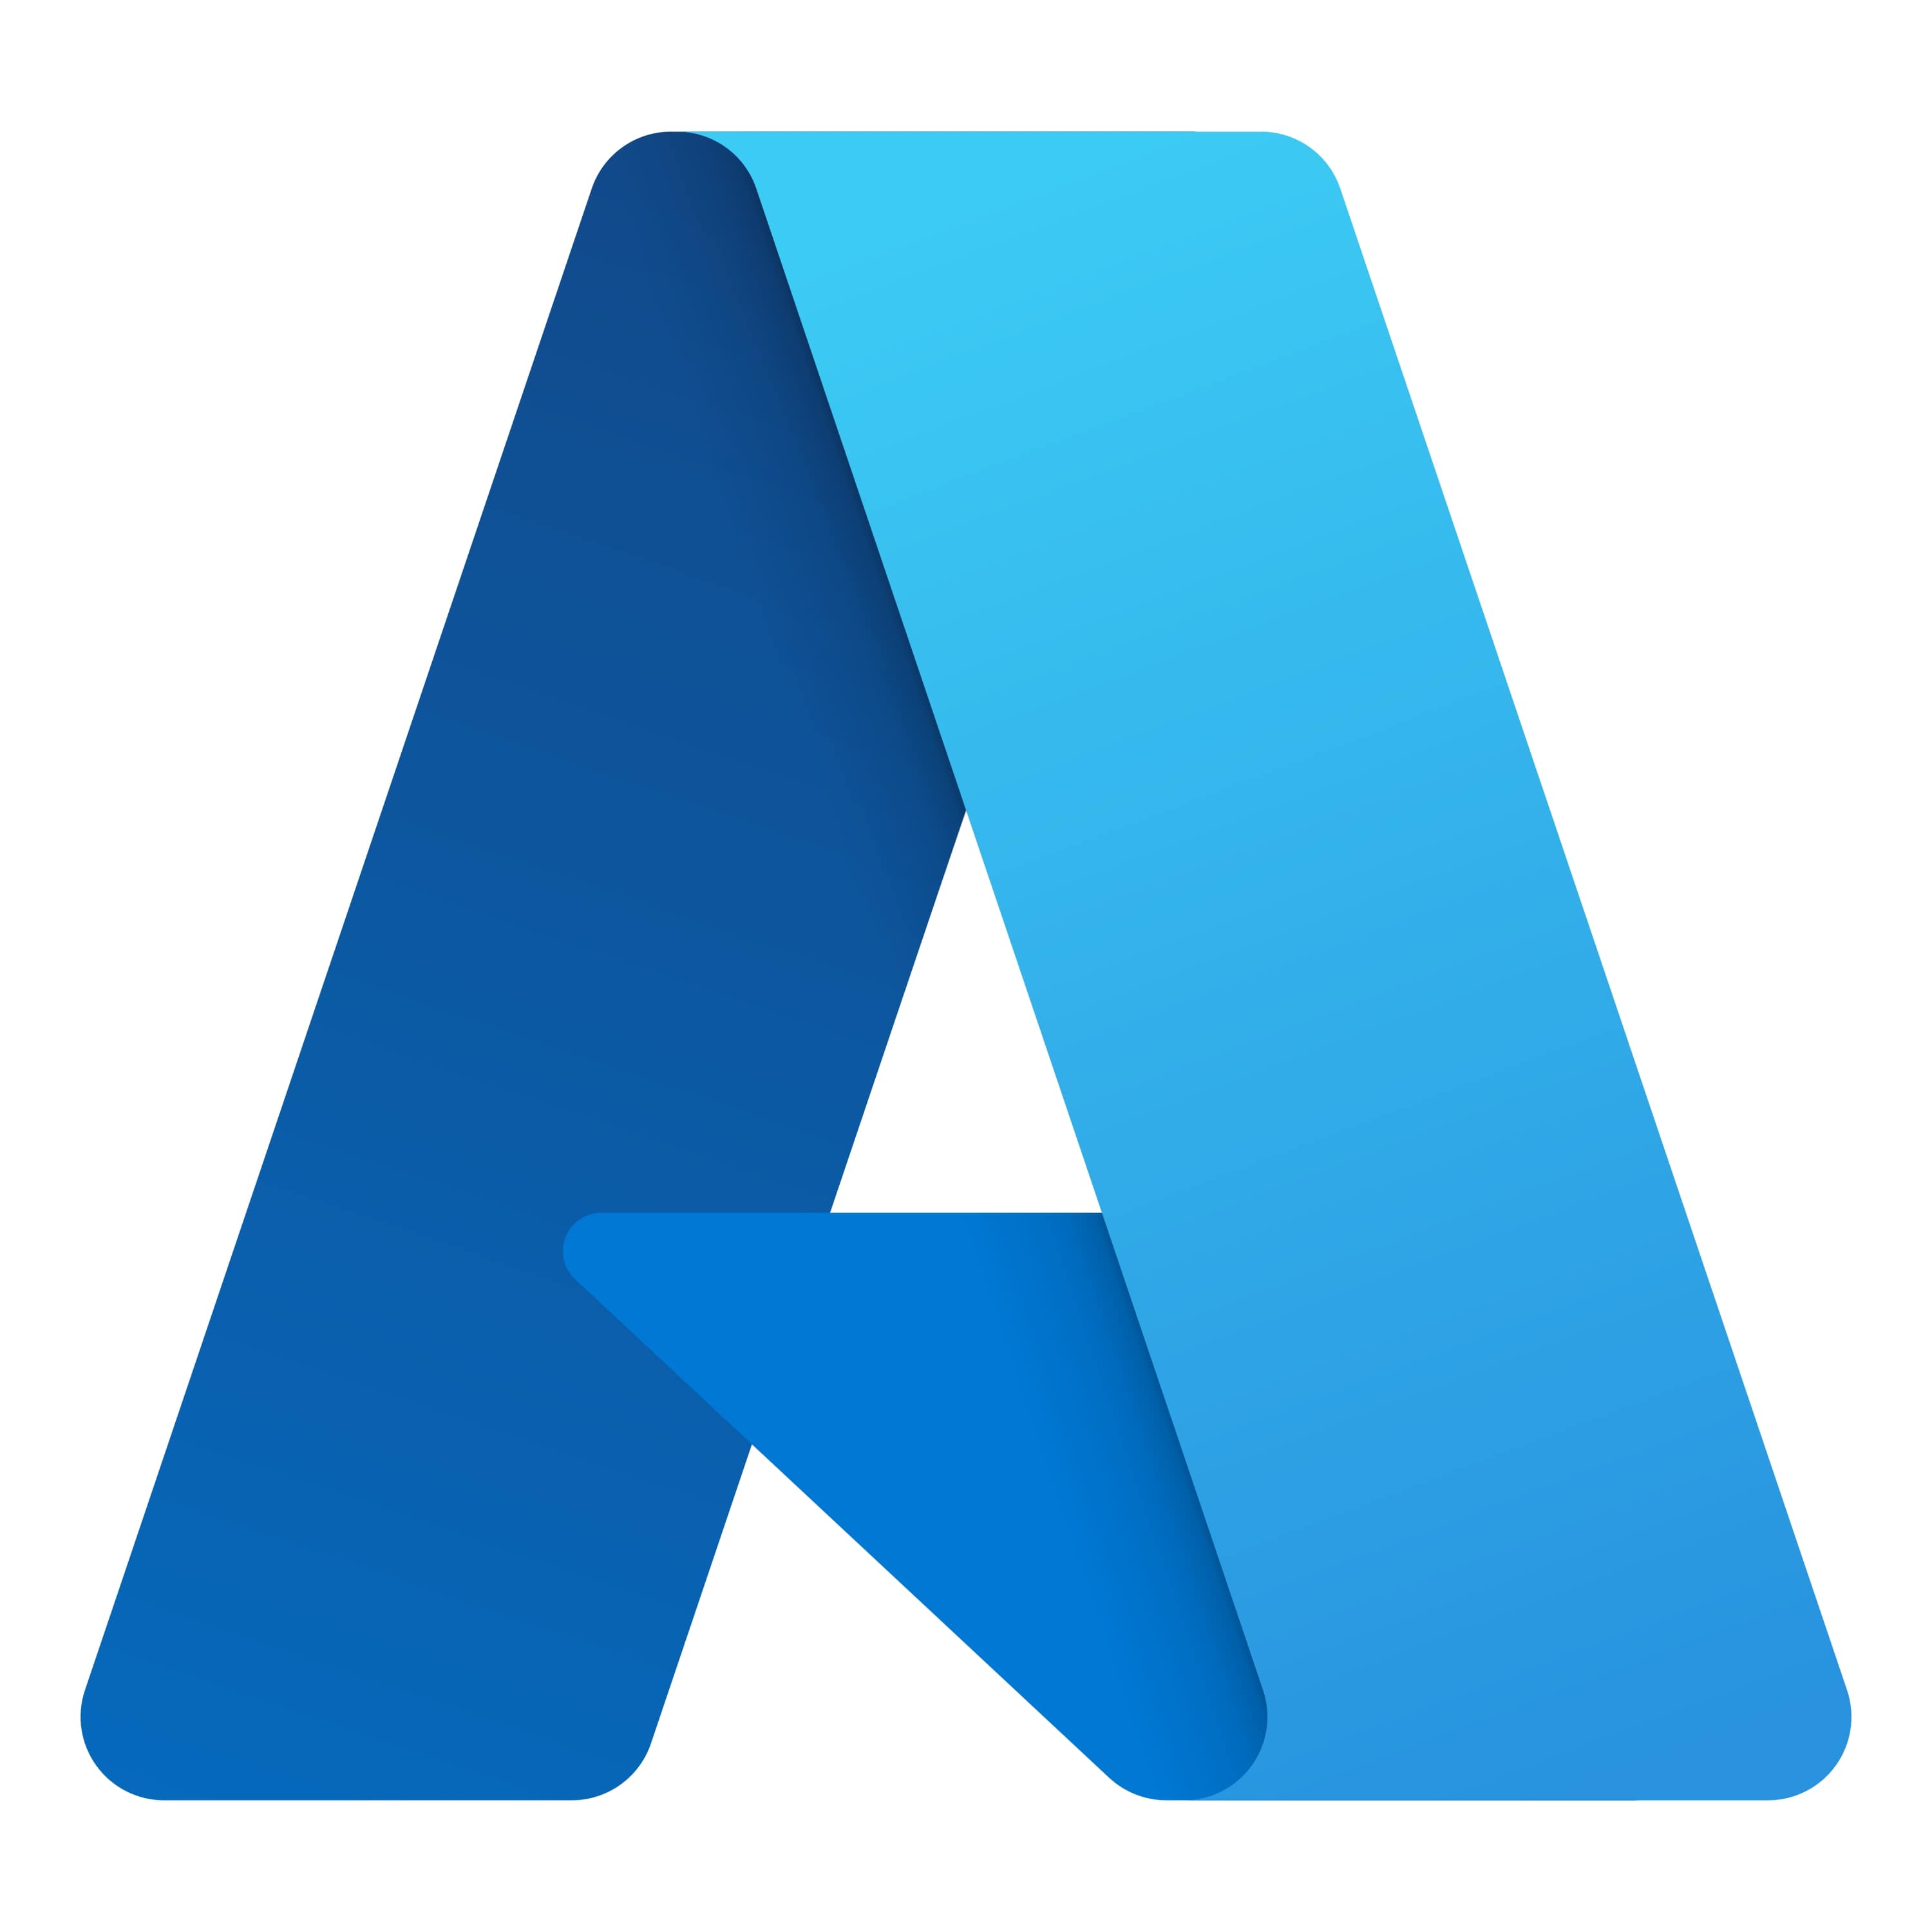 Azure has a new logo, but where do you download it? Here!